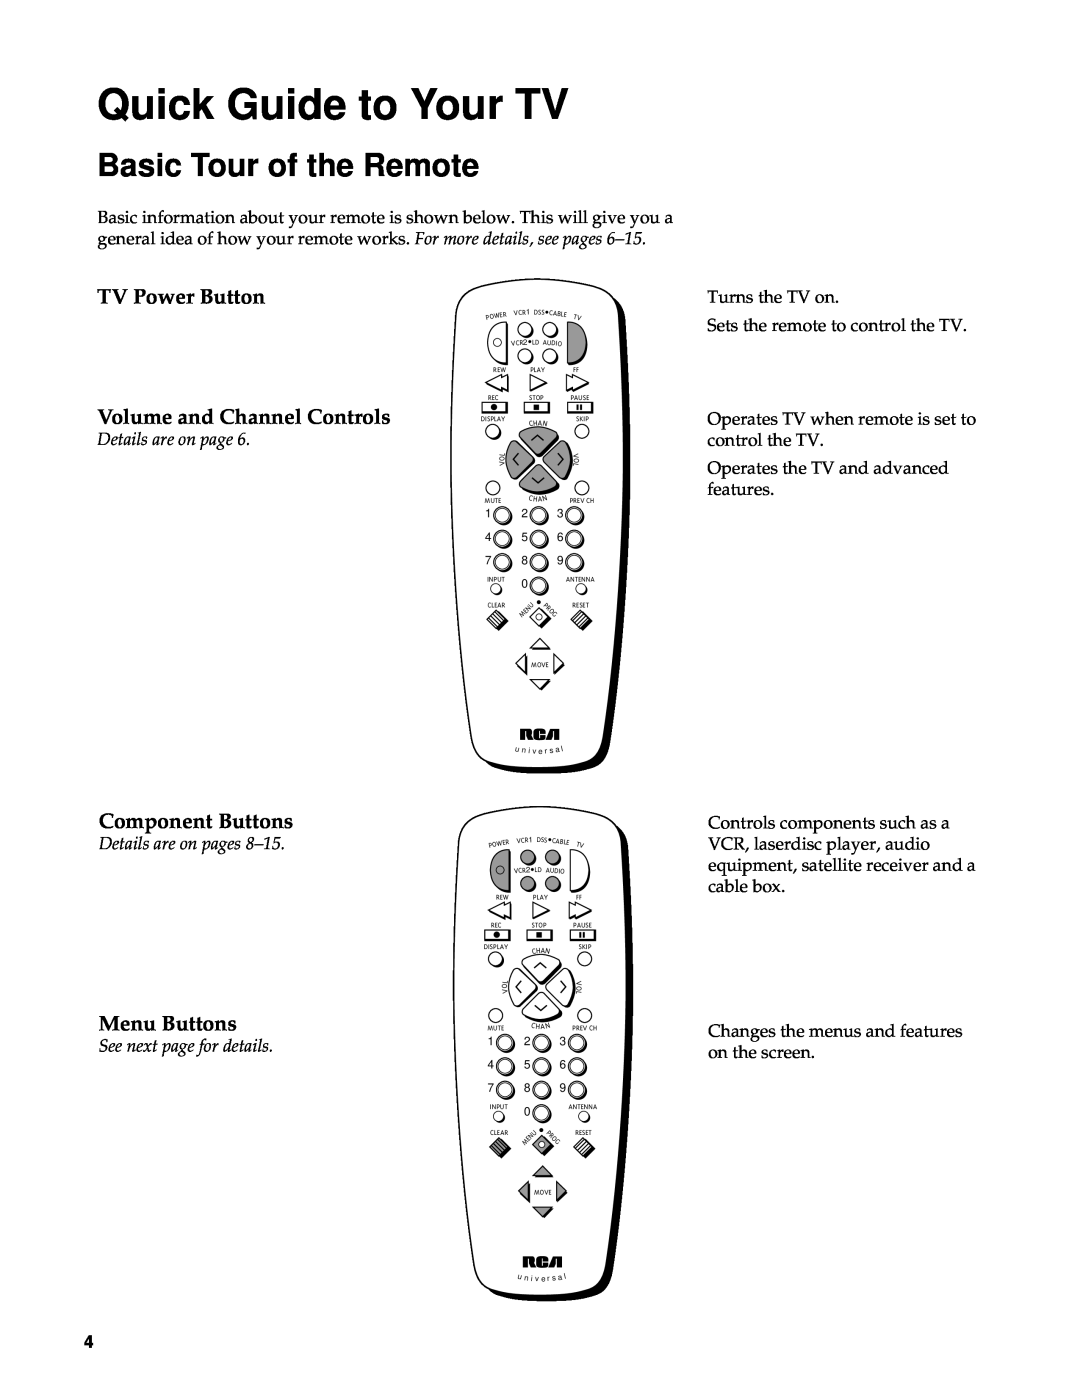 RCA Color TV manual Basic Tour of the Remote, TV Power Button Volume and Channel Controls, Component Buttons, Menu Buttons 